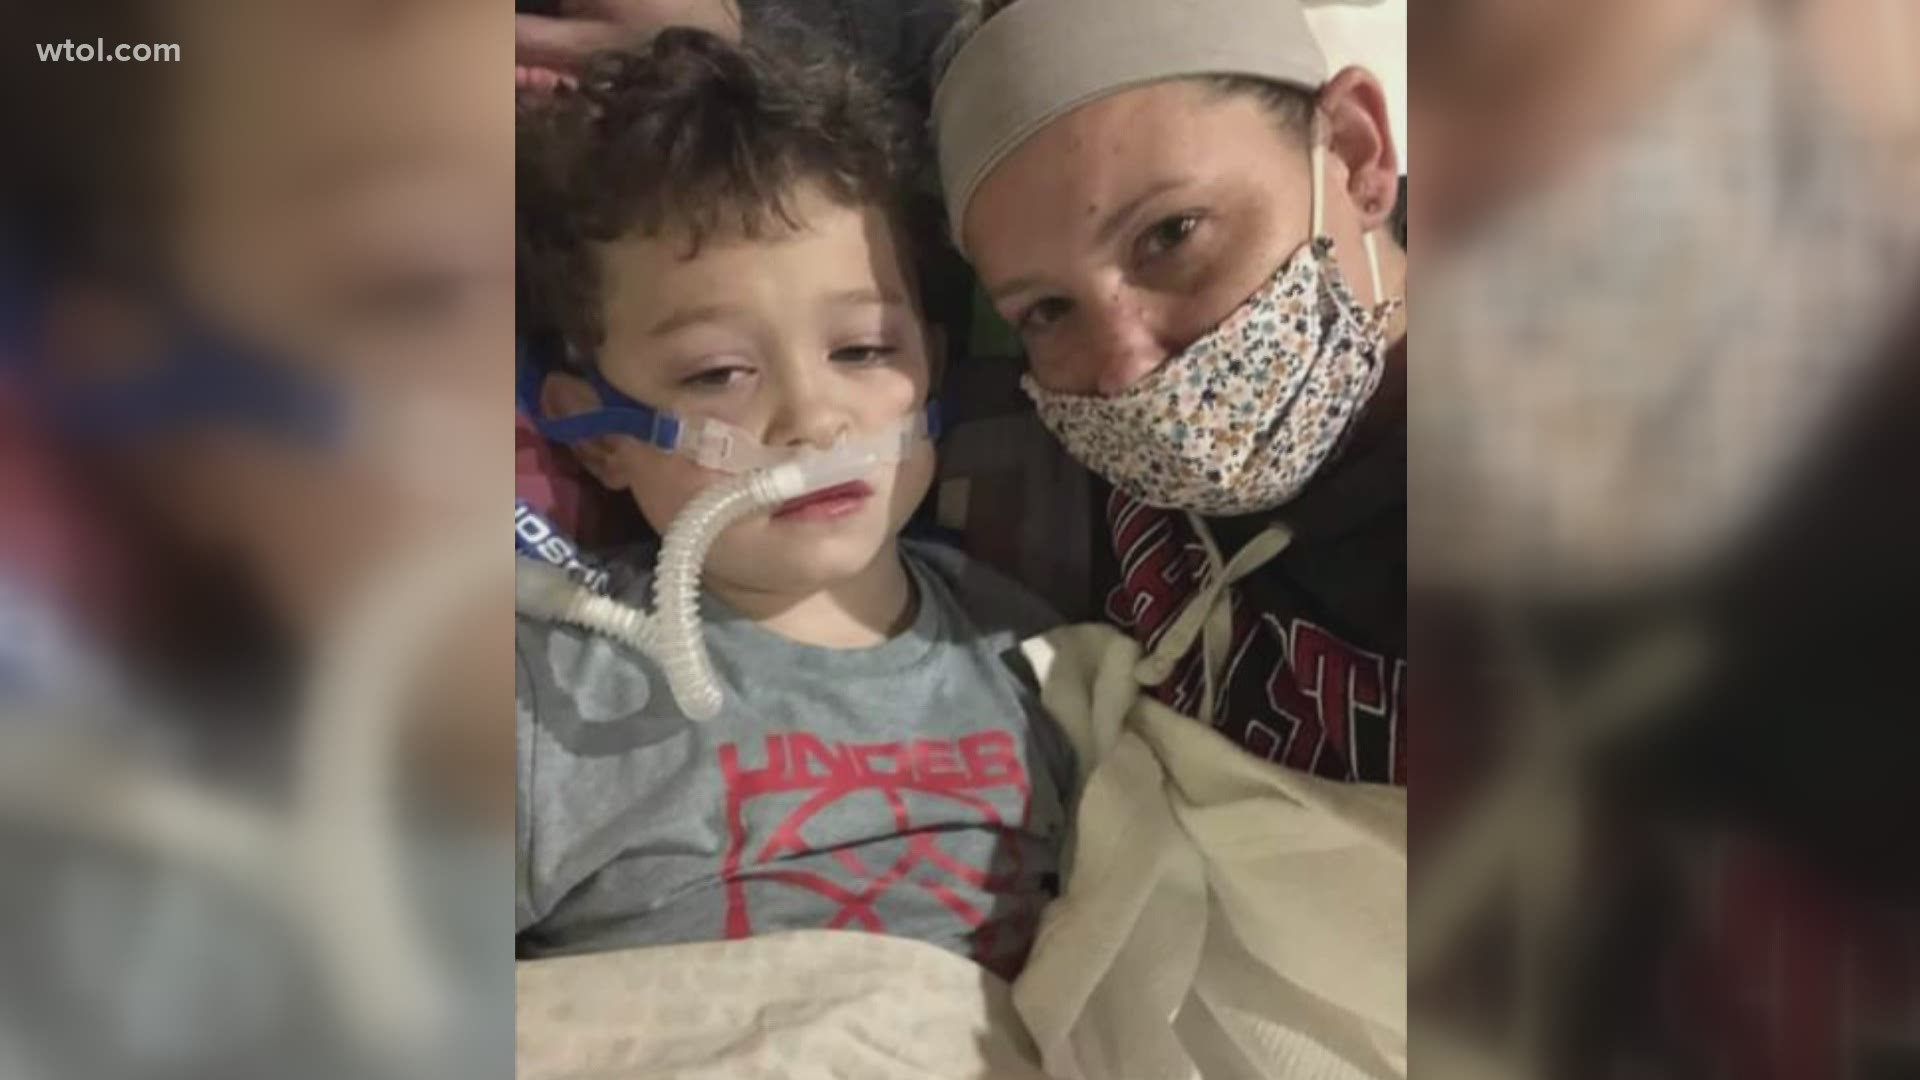 No one knew Easton Westbrook had COVID-19 because he was asymptomatic. It was a shock when the 7 year old developed an illness that put him on a ventilator.